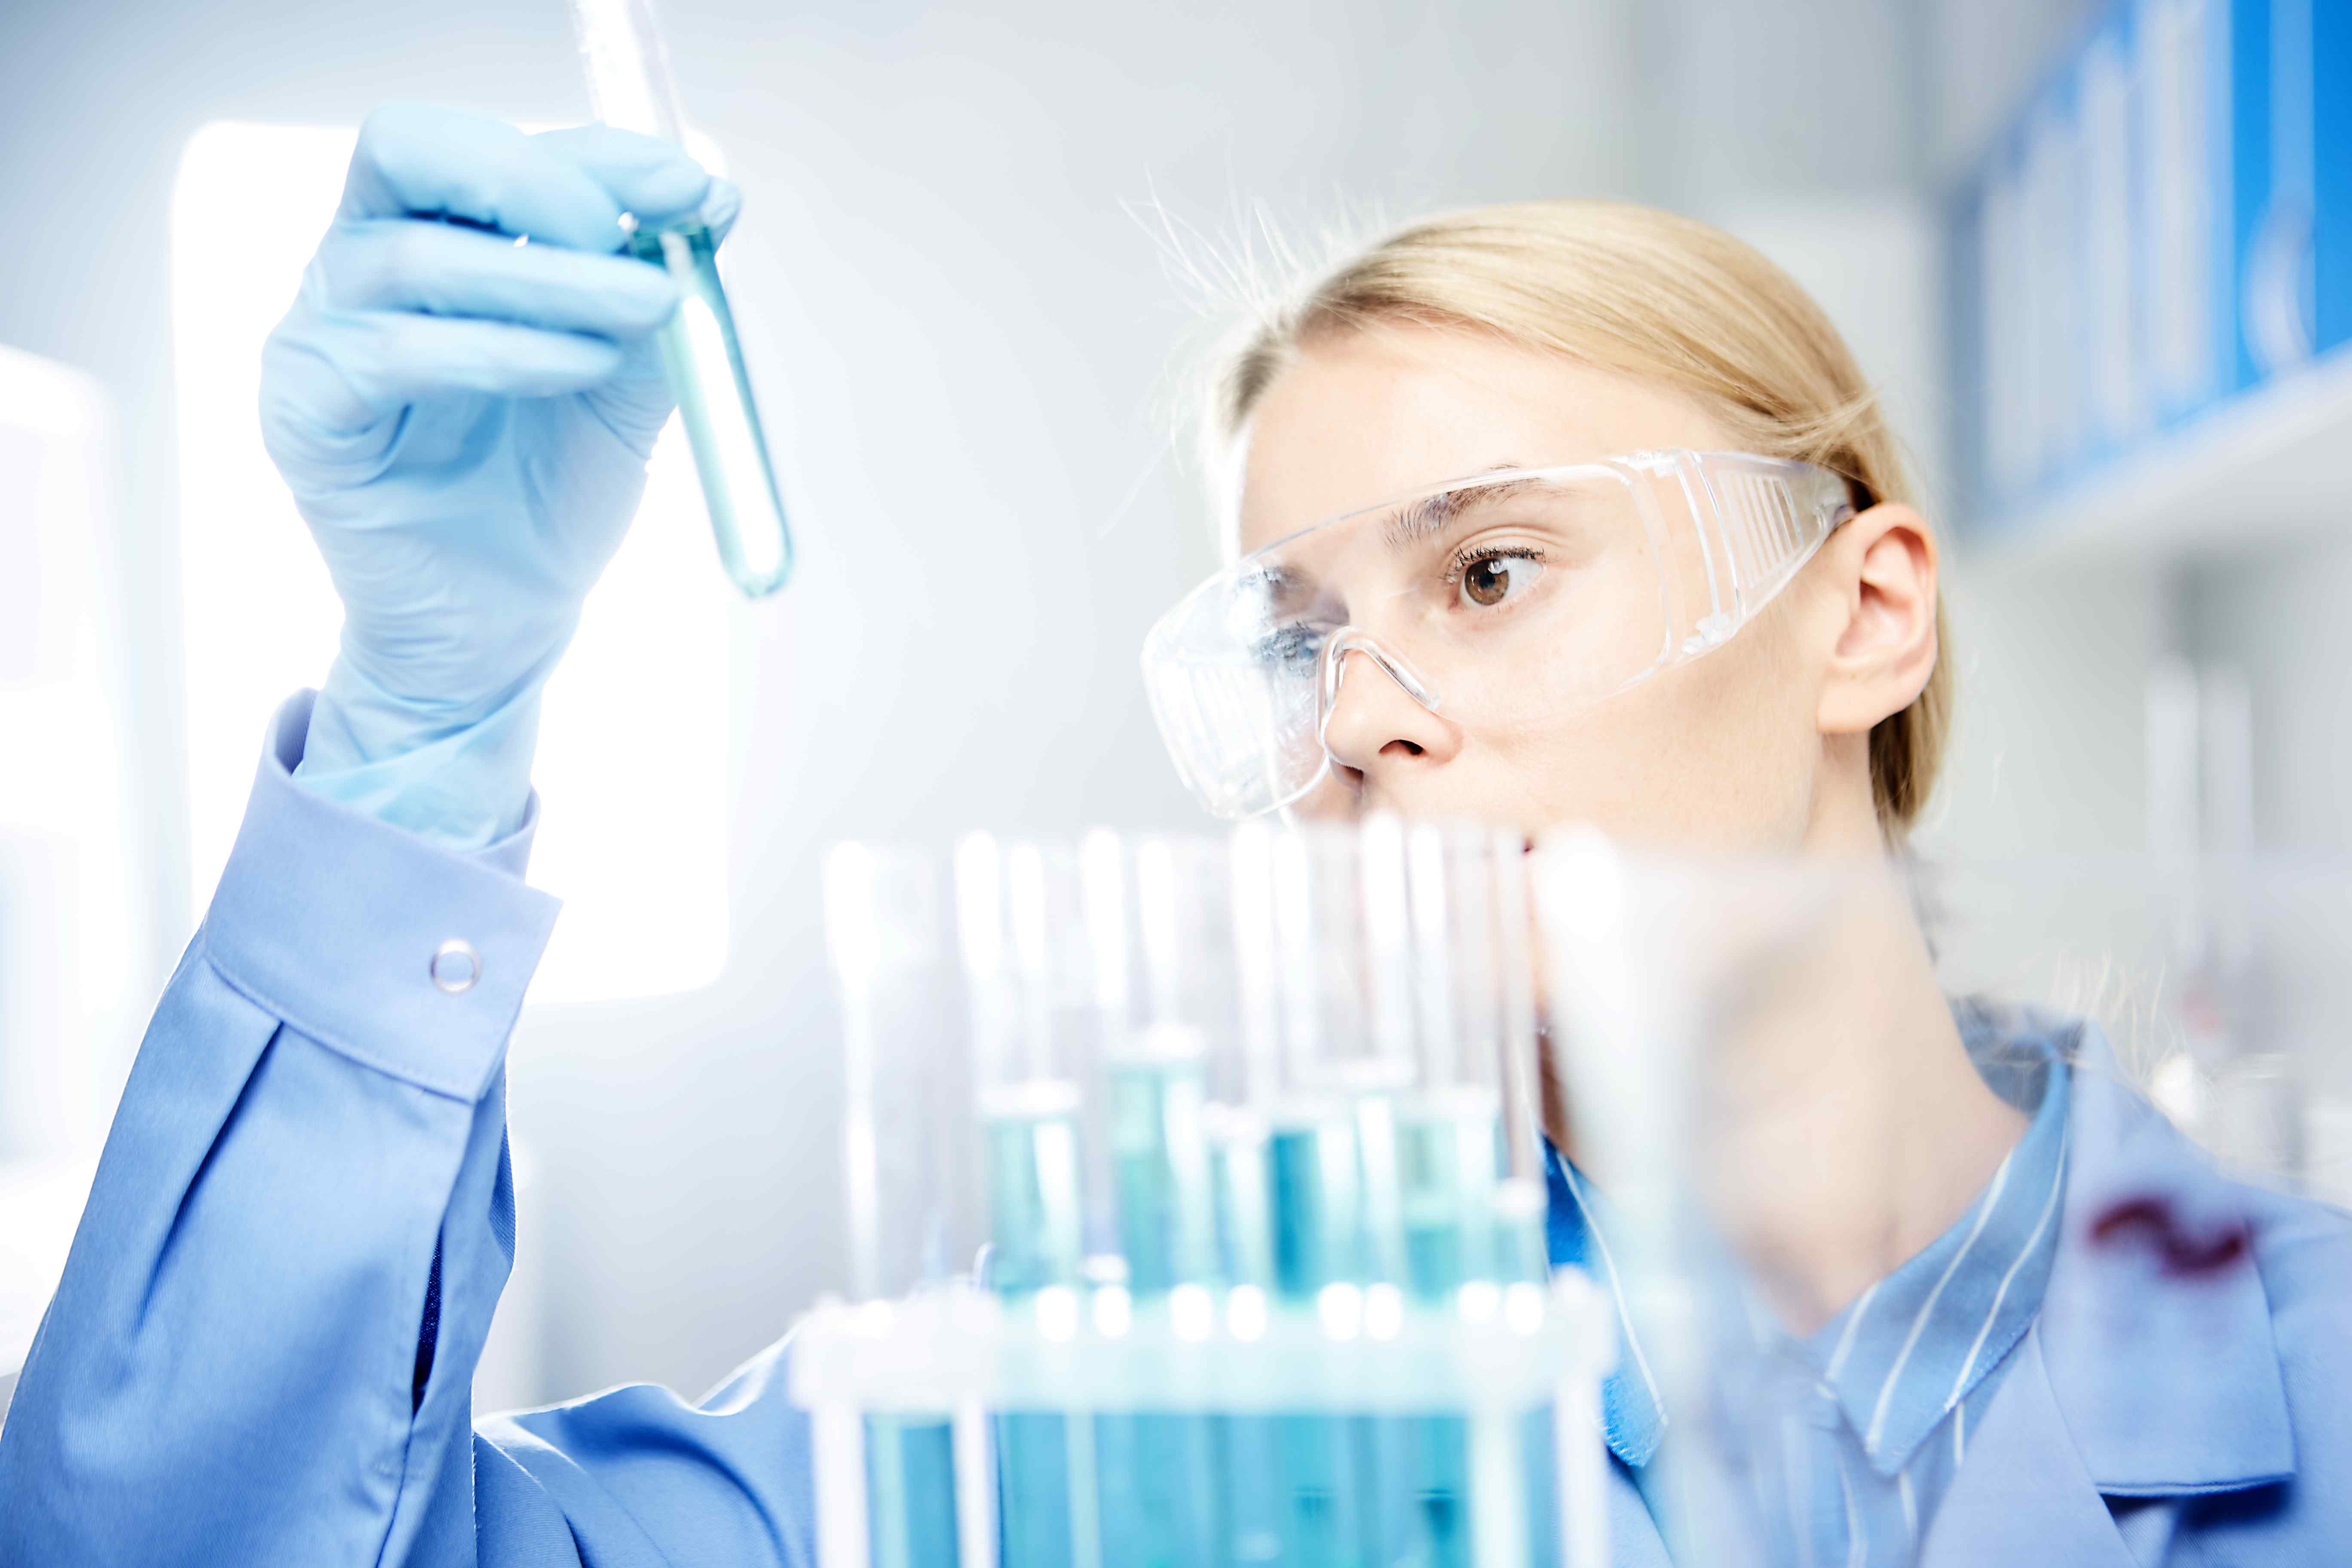 PharmaCeutical Solutions Business Image / Female researcher staring at test tubes